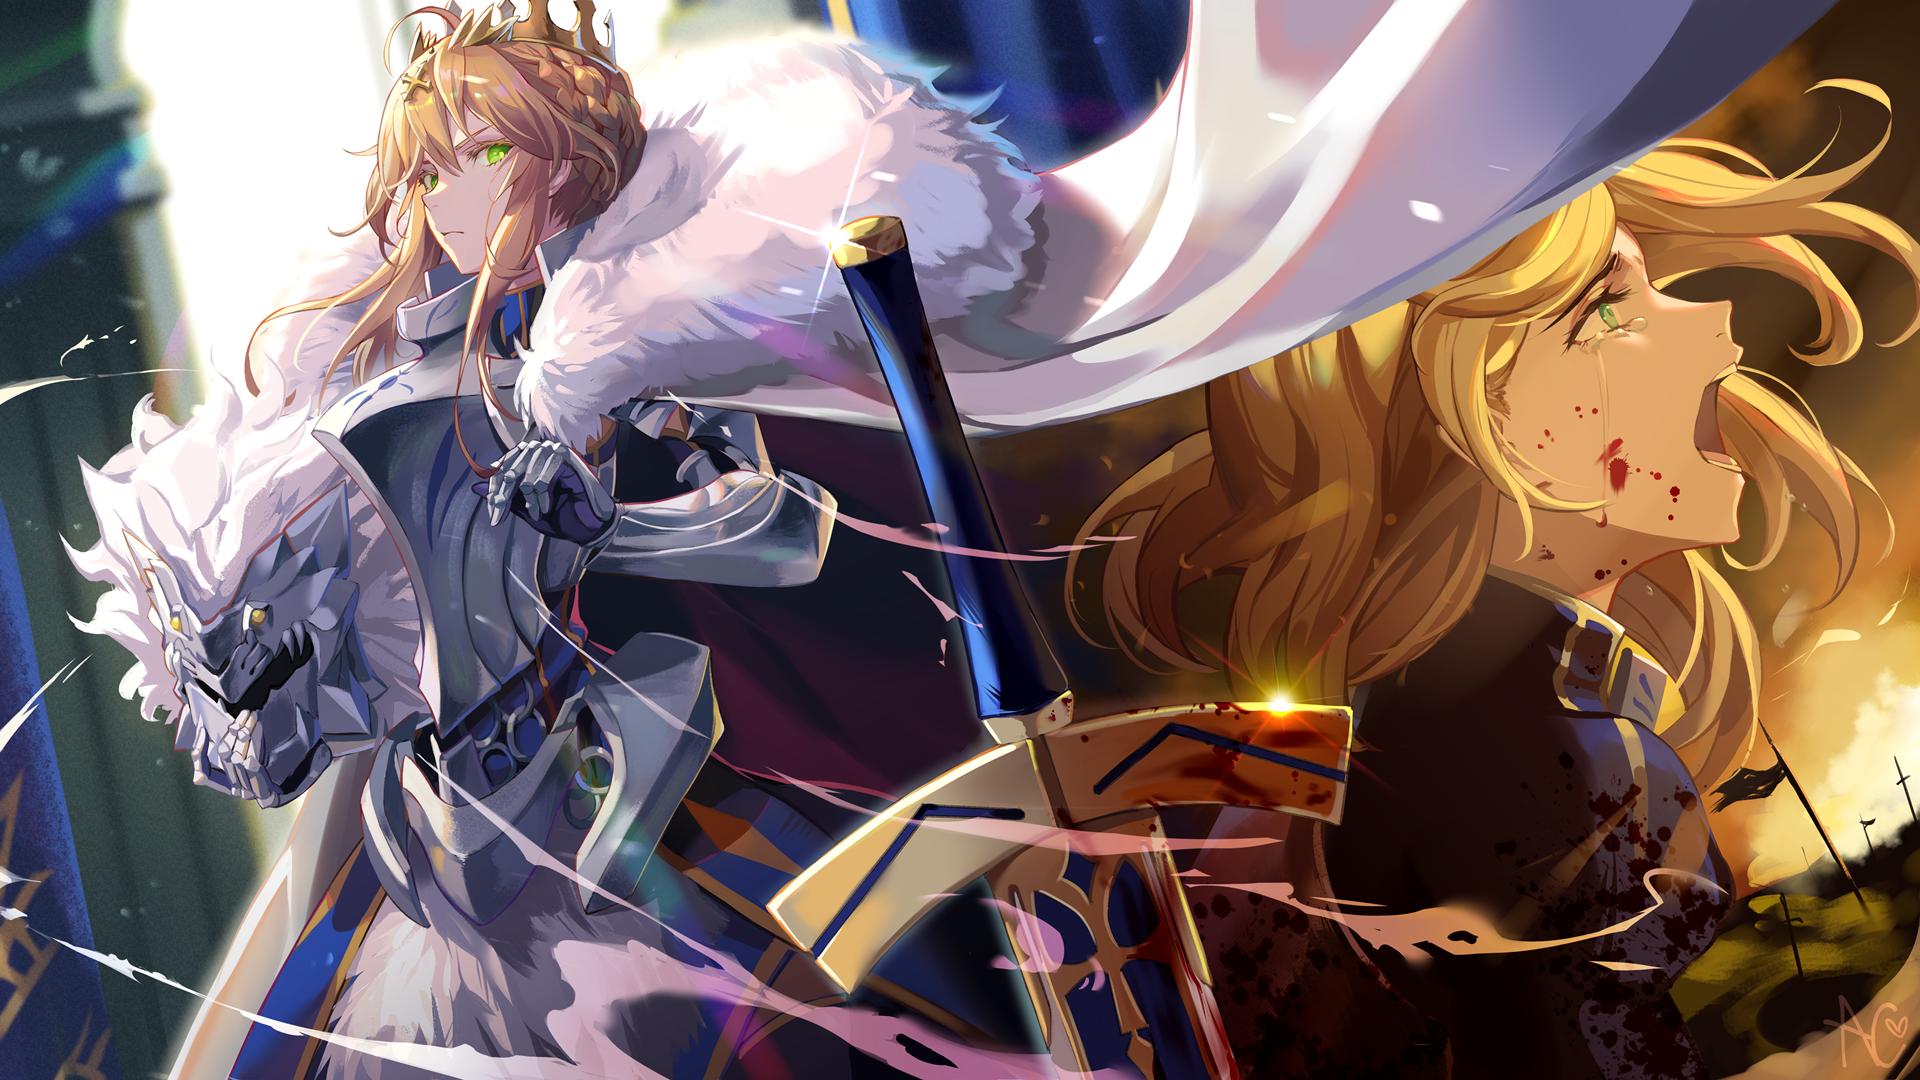 3500+ Fate/Grand Order HD Wallpapers and Backgrounds